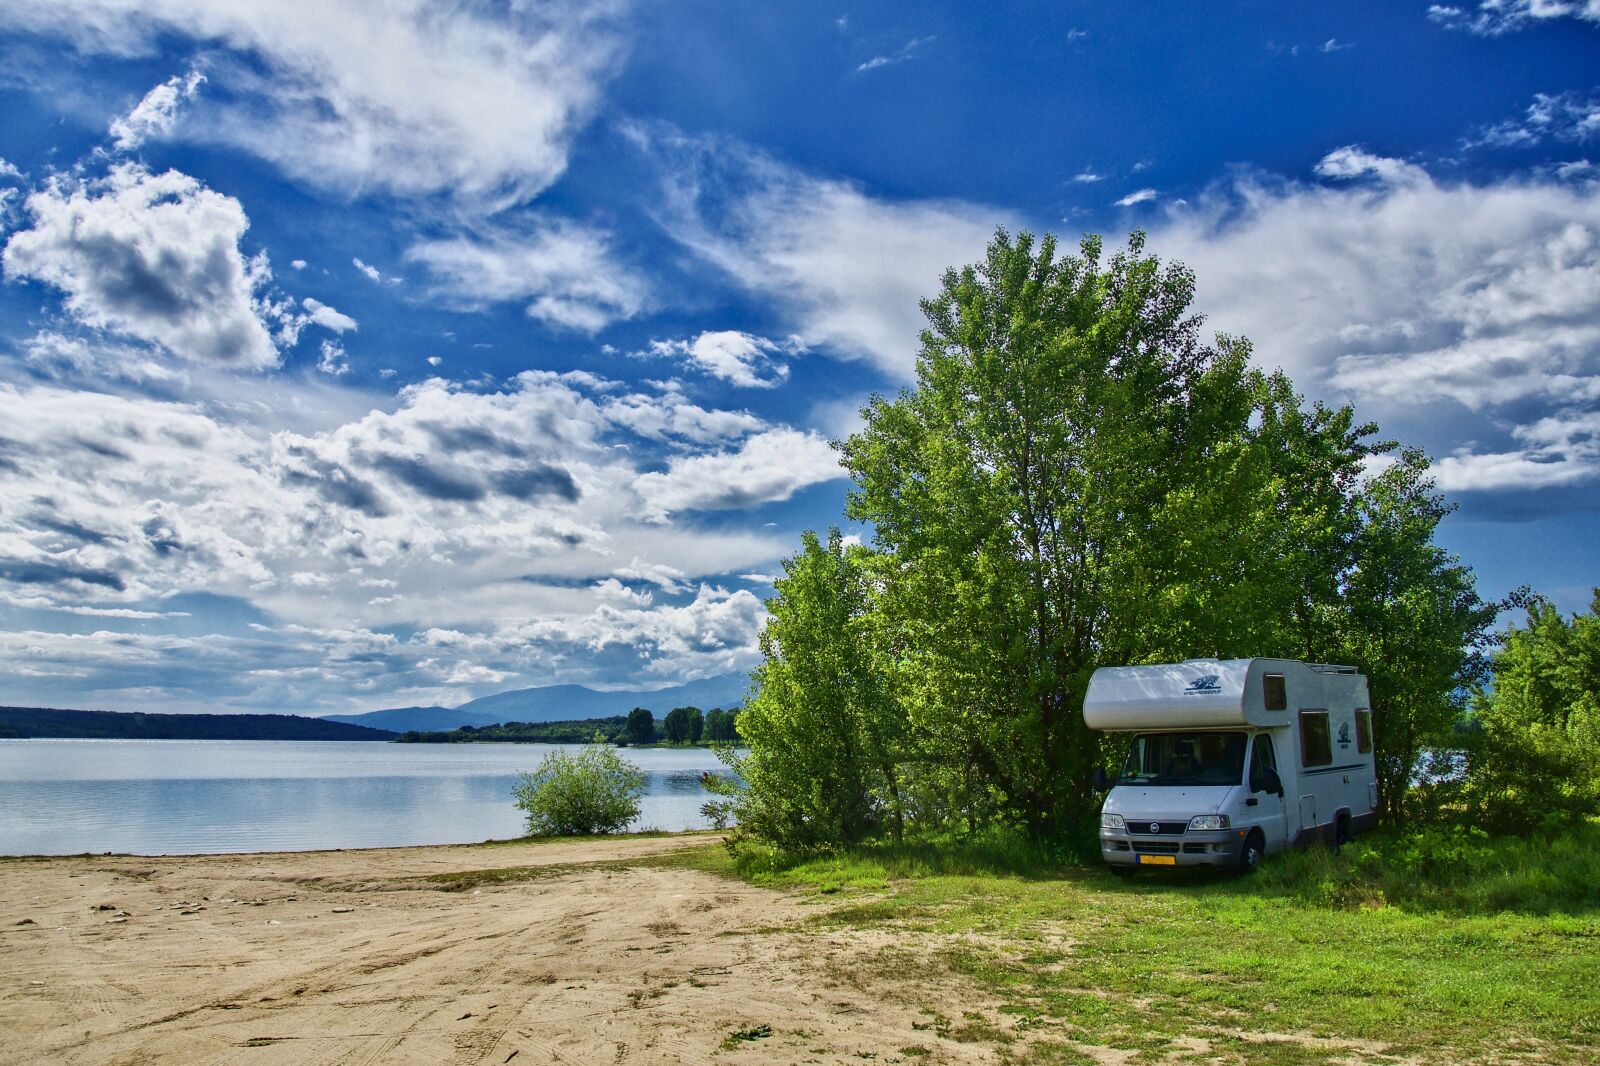 Sony a6500 sample photo. Camping, motorhome, solitude photography